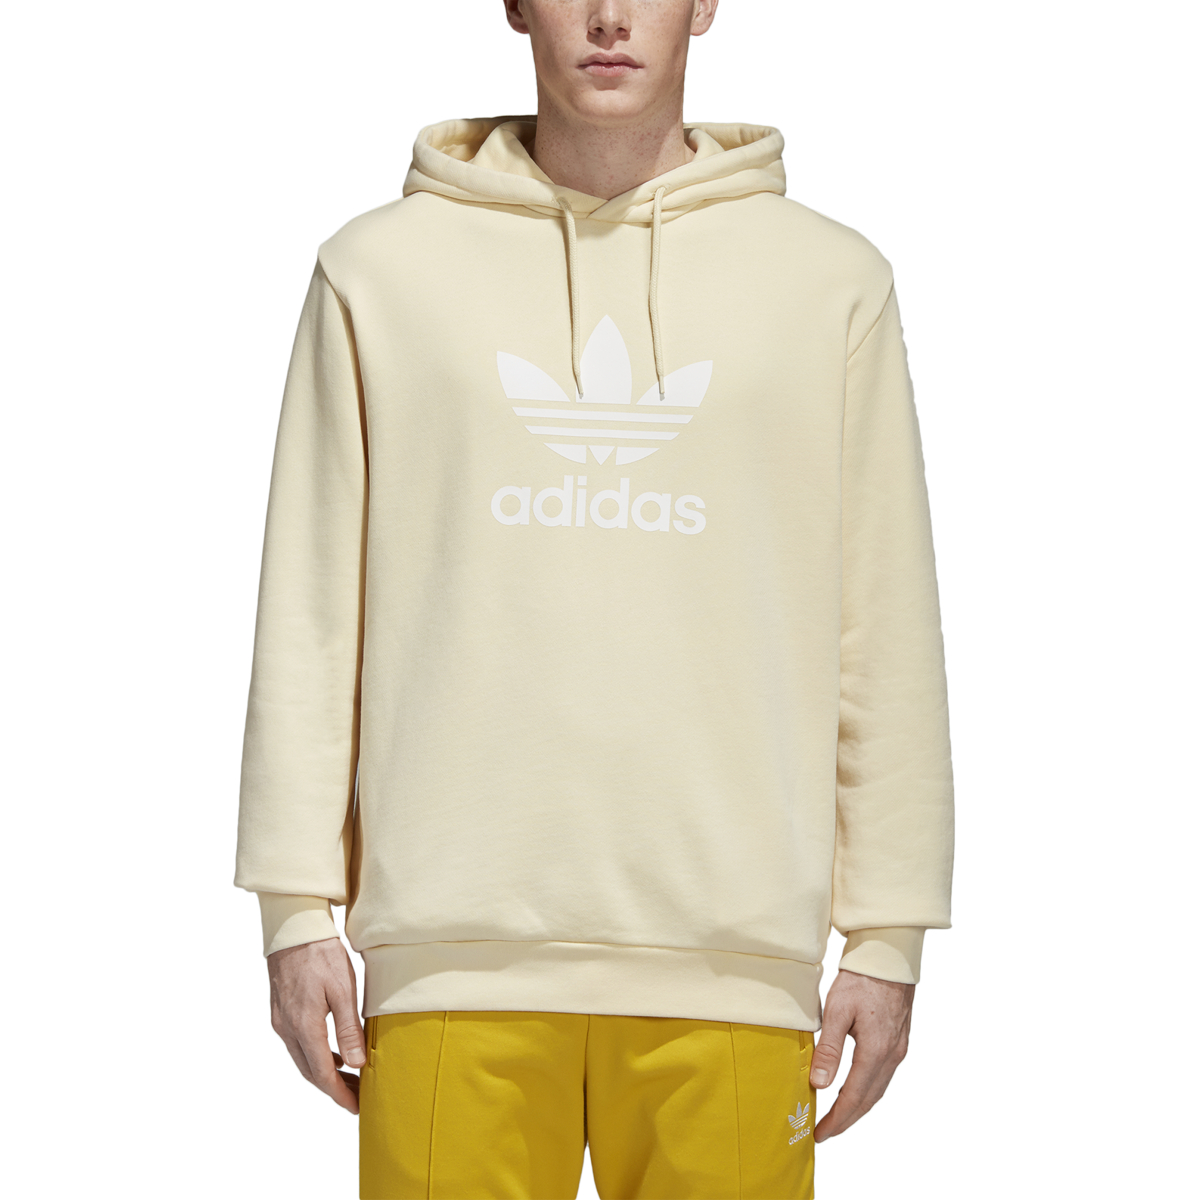 white adidas pullover hoodie